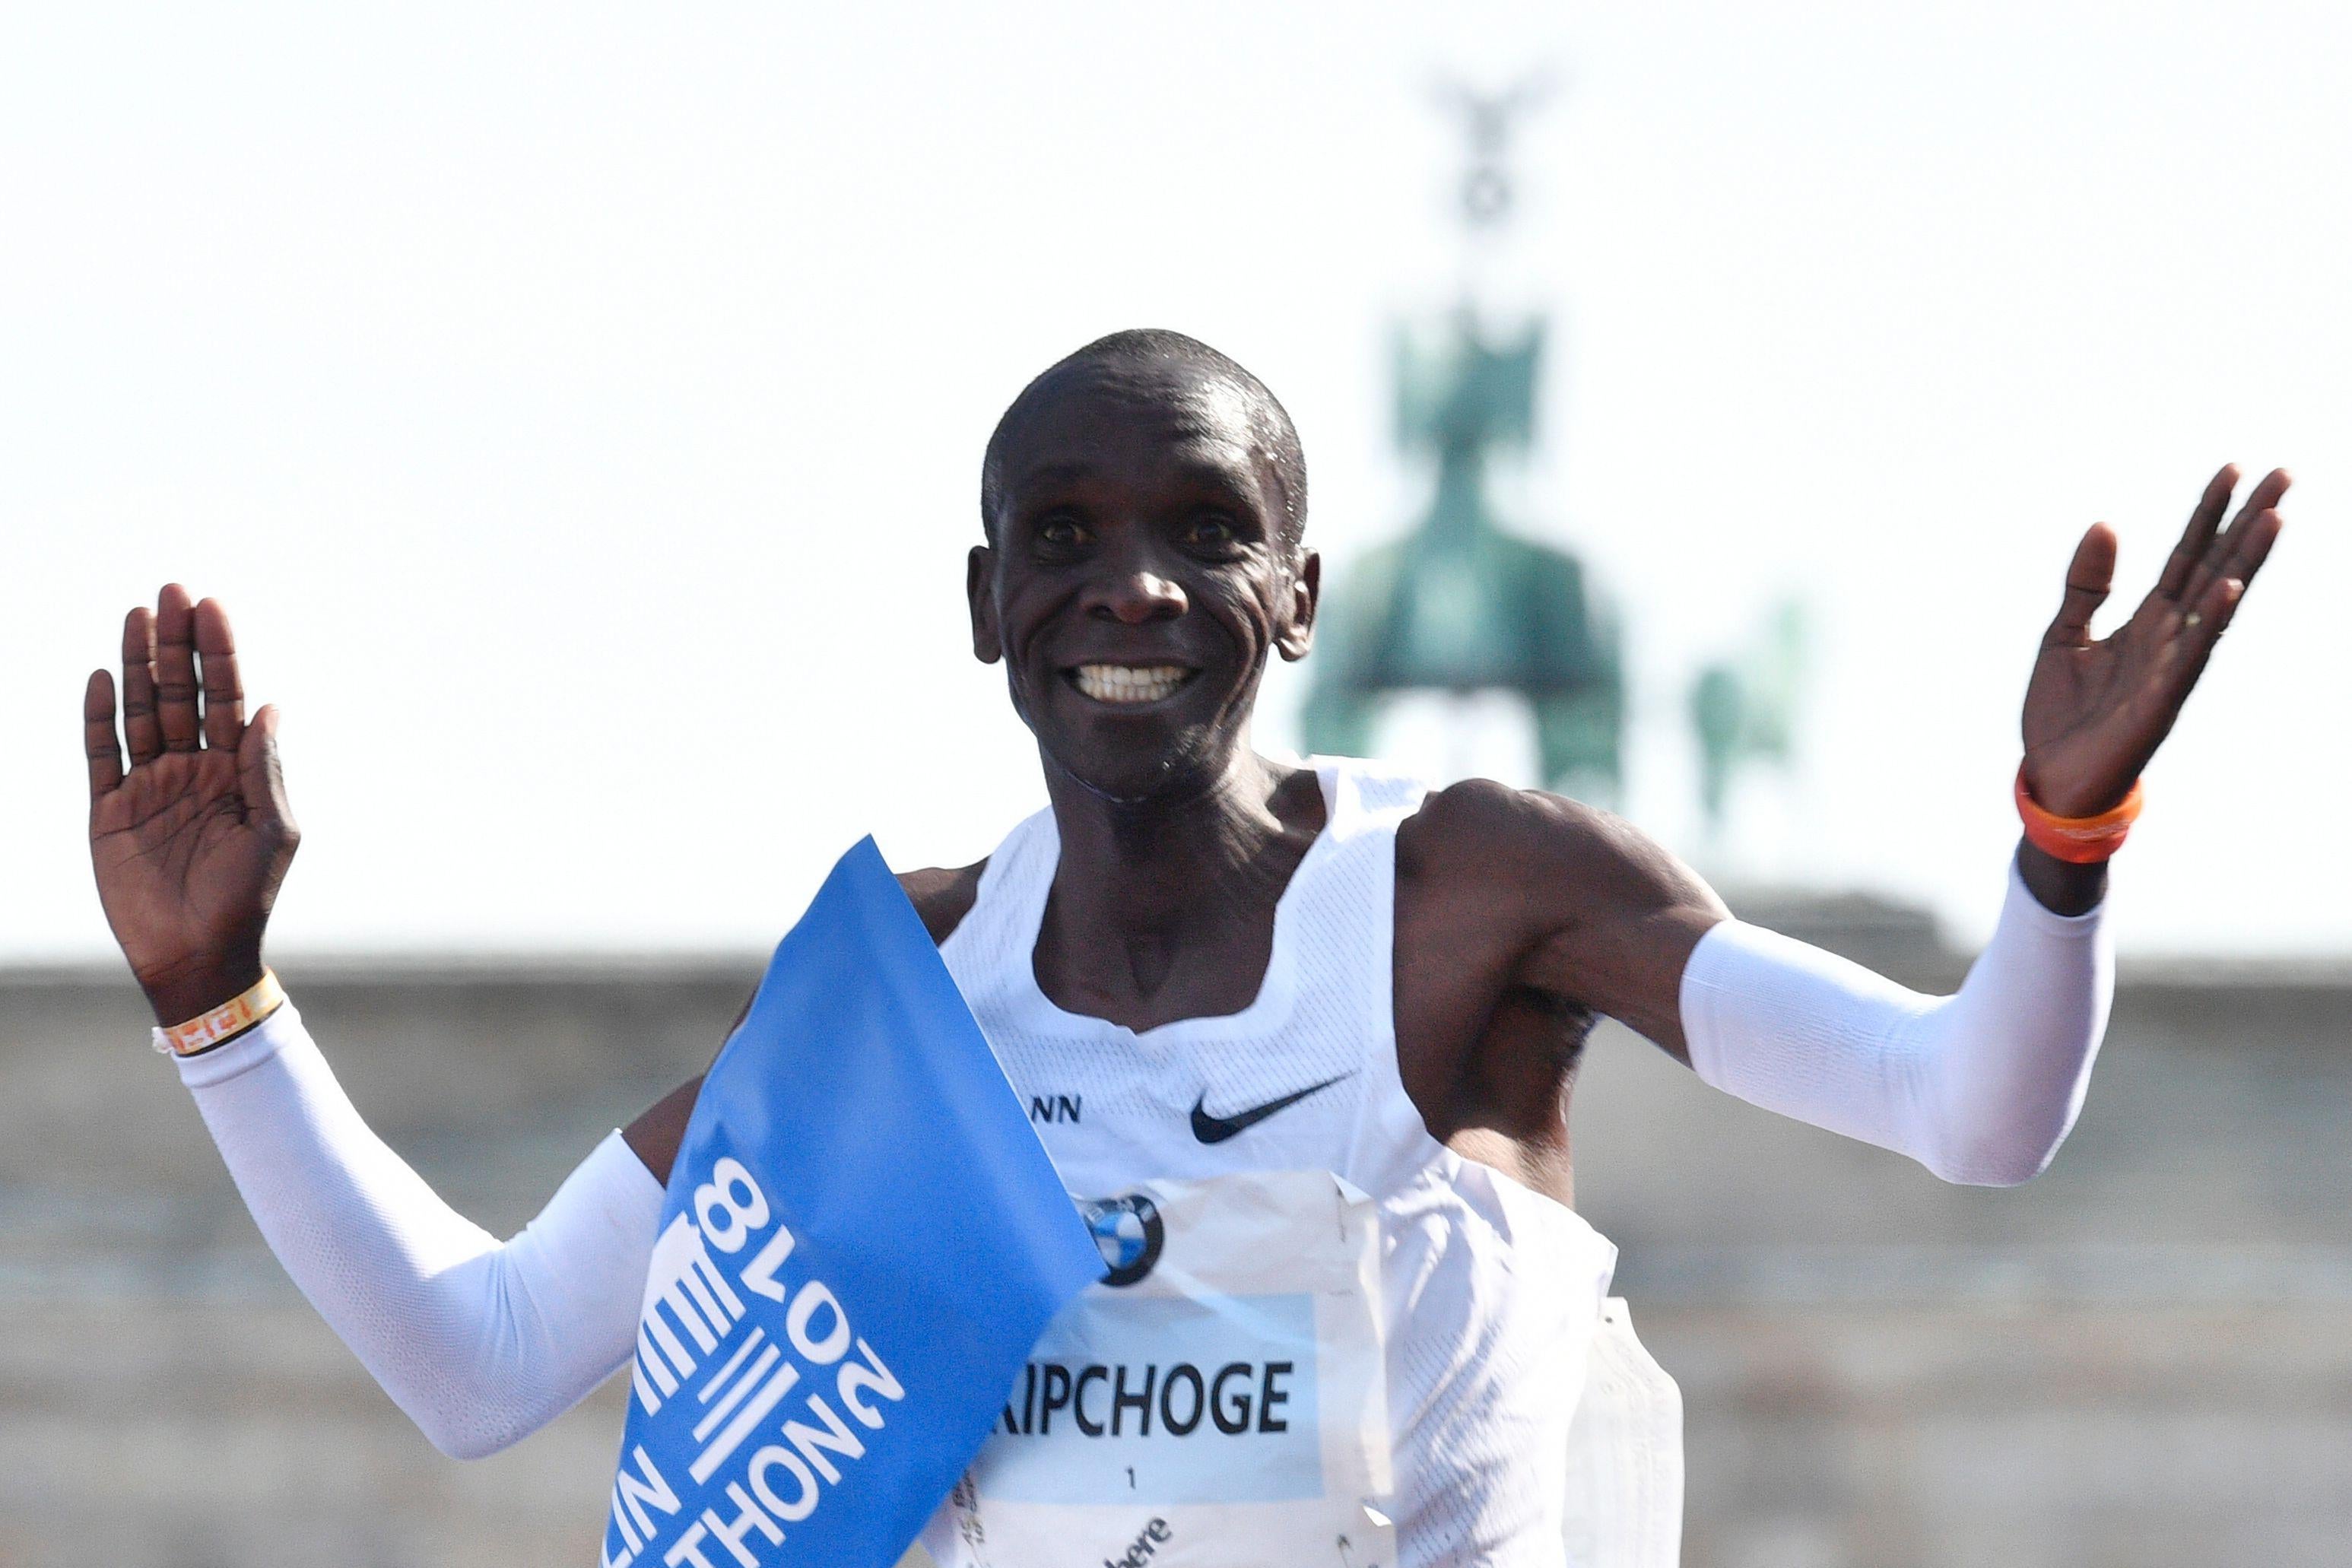 Kenya's Eliud Kipchoge crosses the finish line to win the Berlin Marathon setting a new world record with 2h01:39 on September 16, 2018 in Berlin. (Photo by John MACDOUGALL / AFP)        (Photo credit should read JOHN MACDOUGALL/AFP/Getty Images)